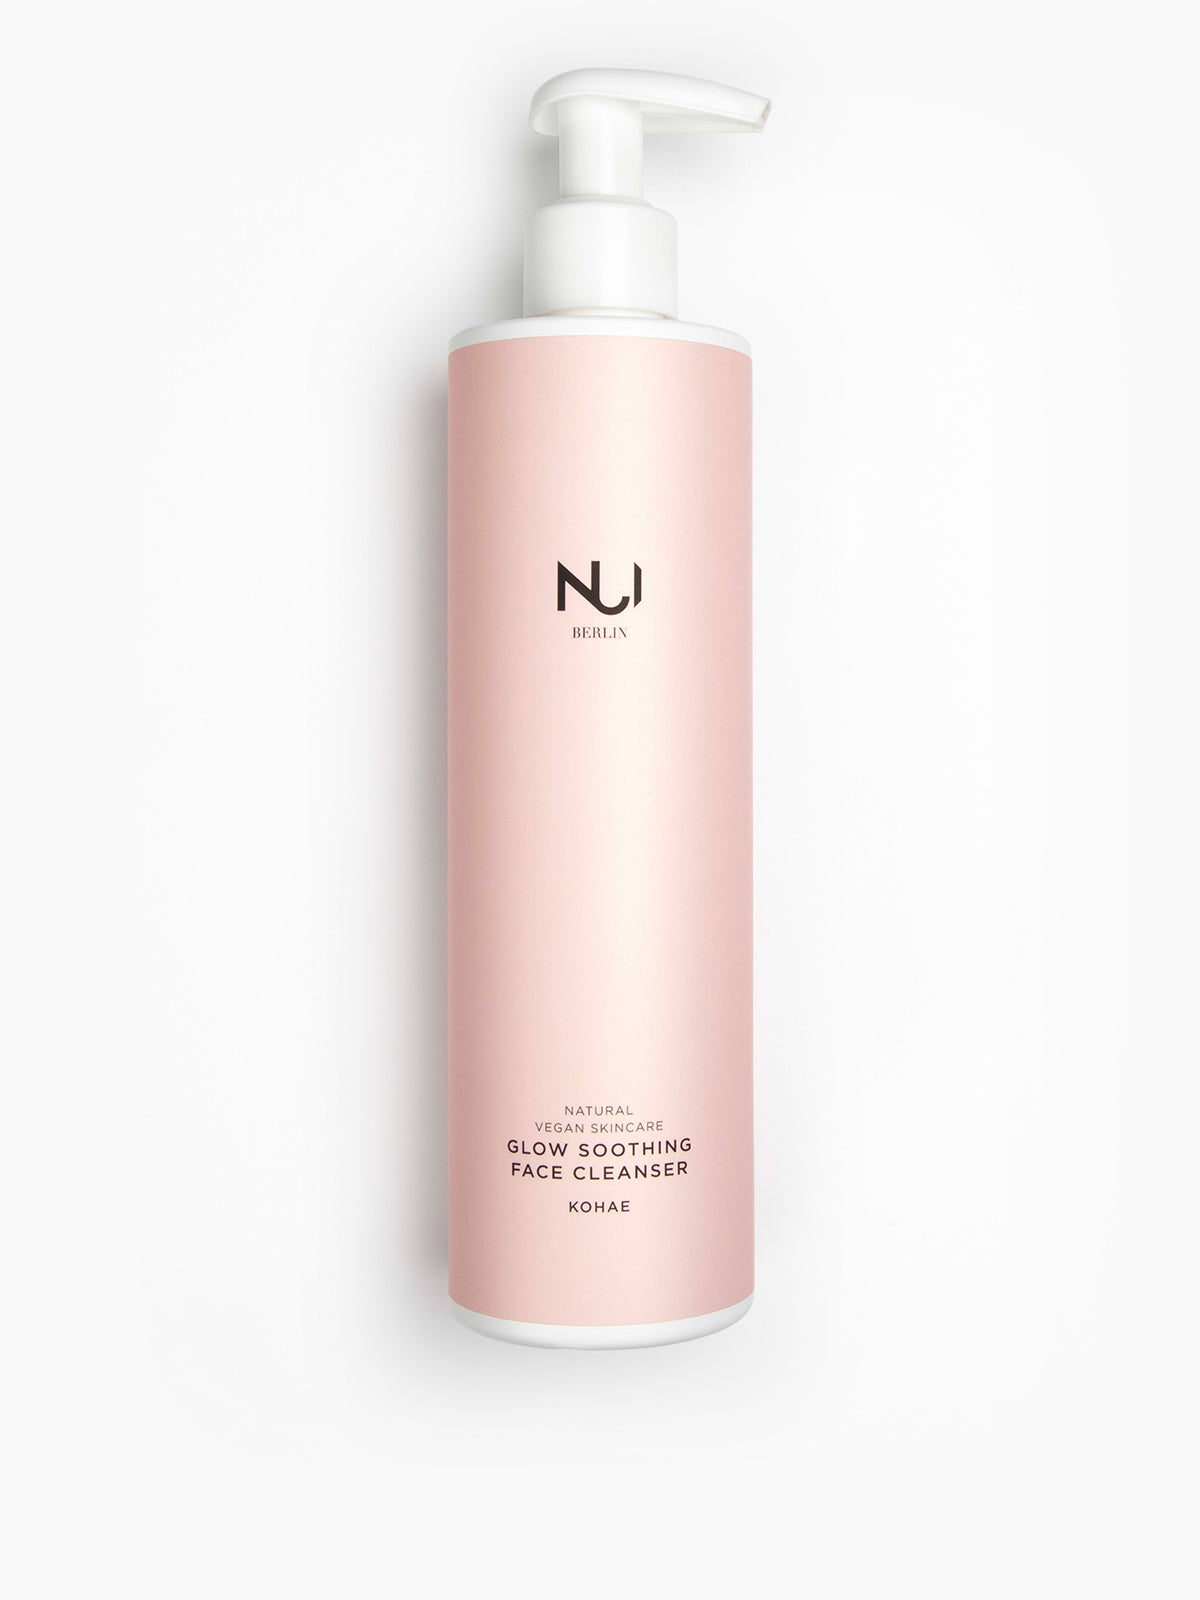 NUI Natural Glow Soothing Face Cleanser KOHAE